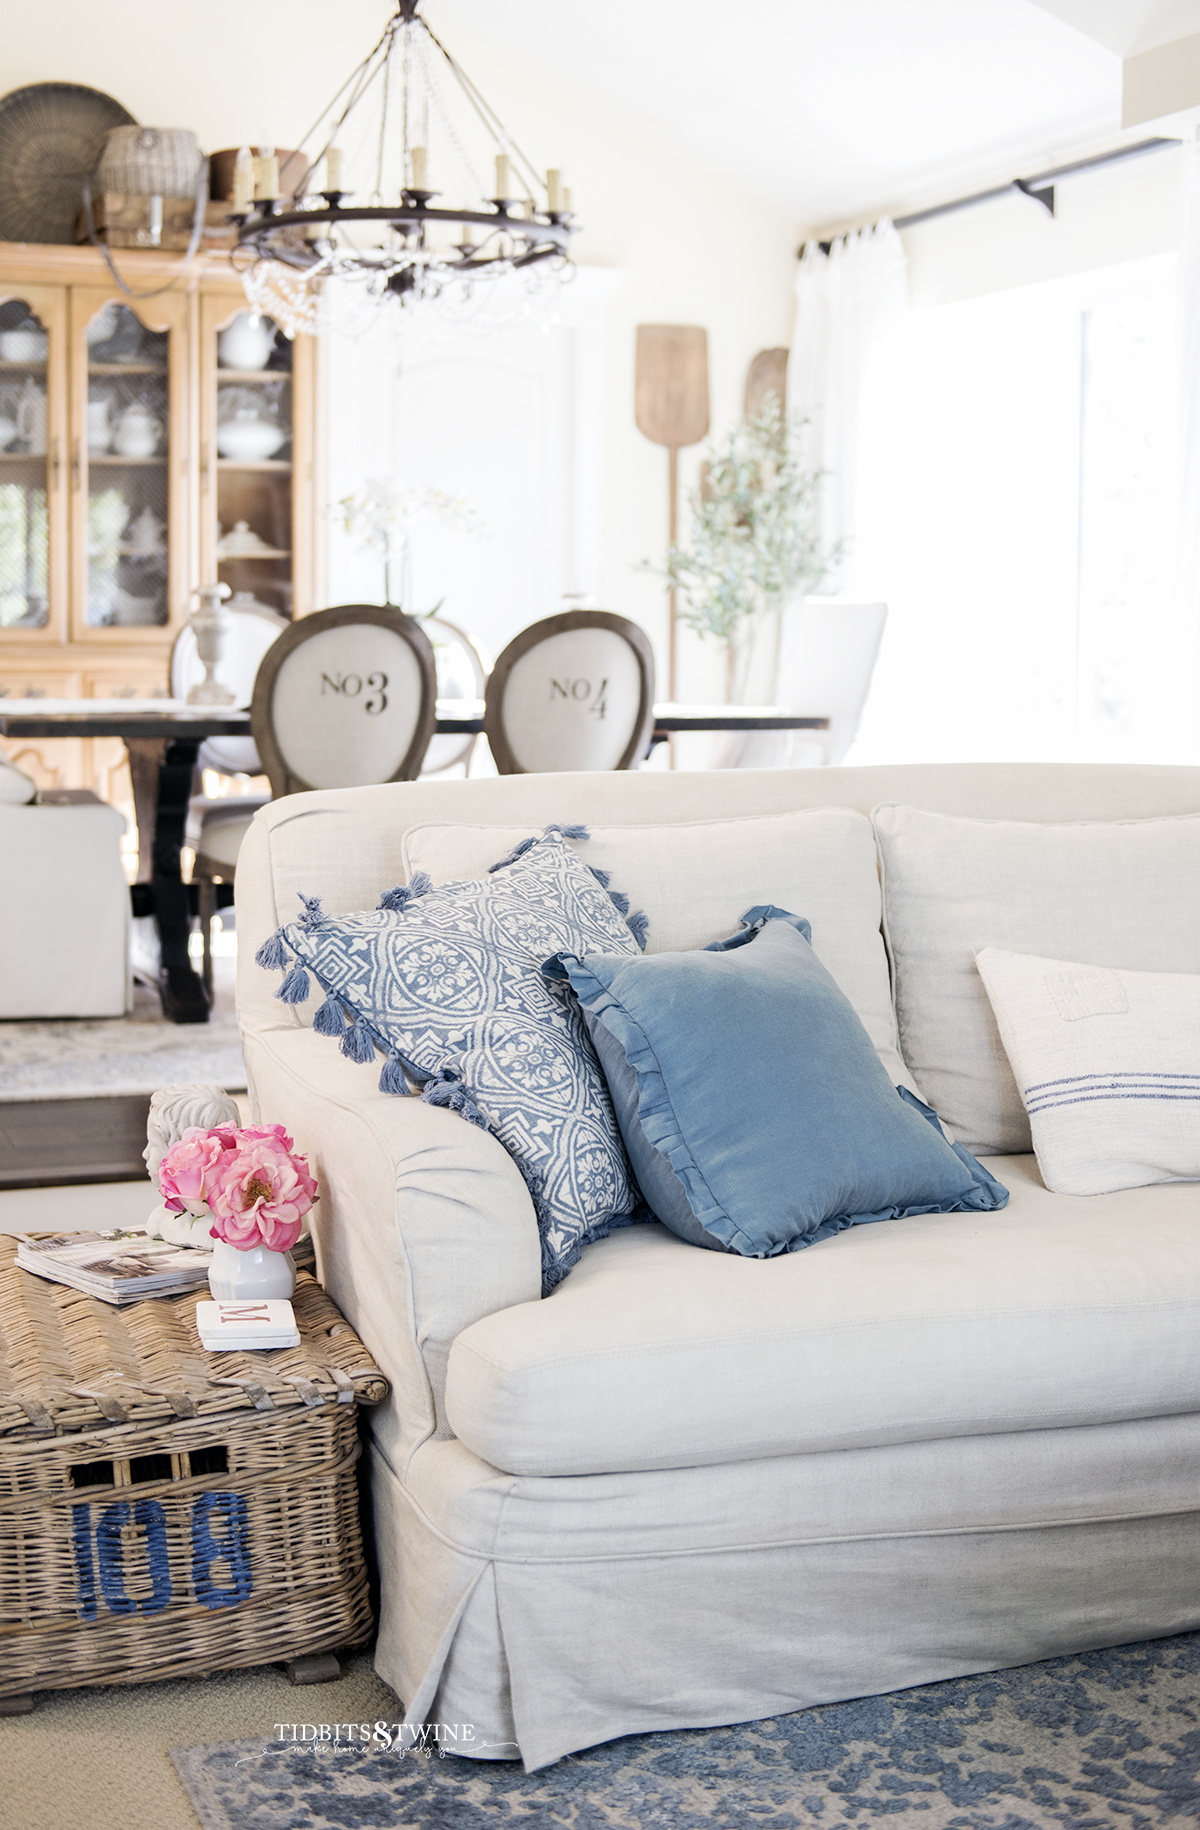 French slipcovered sofa with blue pillows and french antique basket for side table